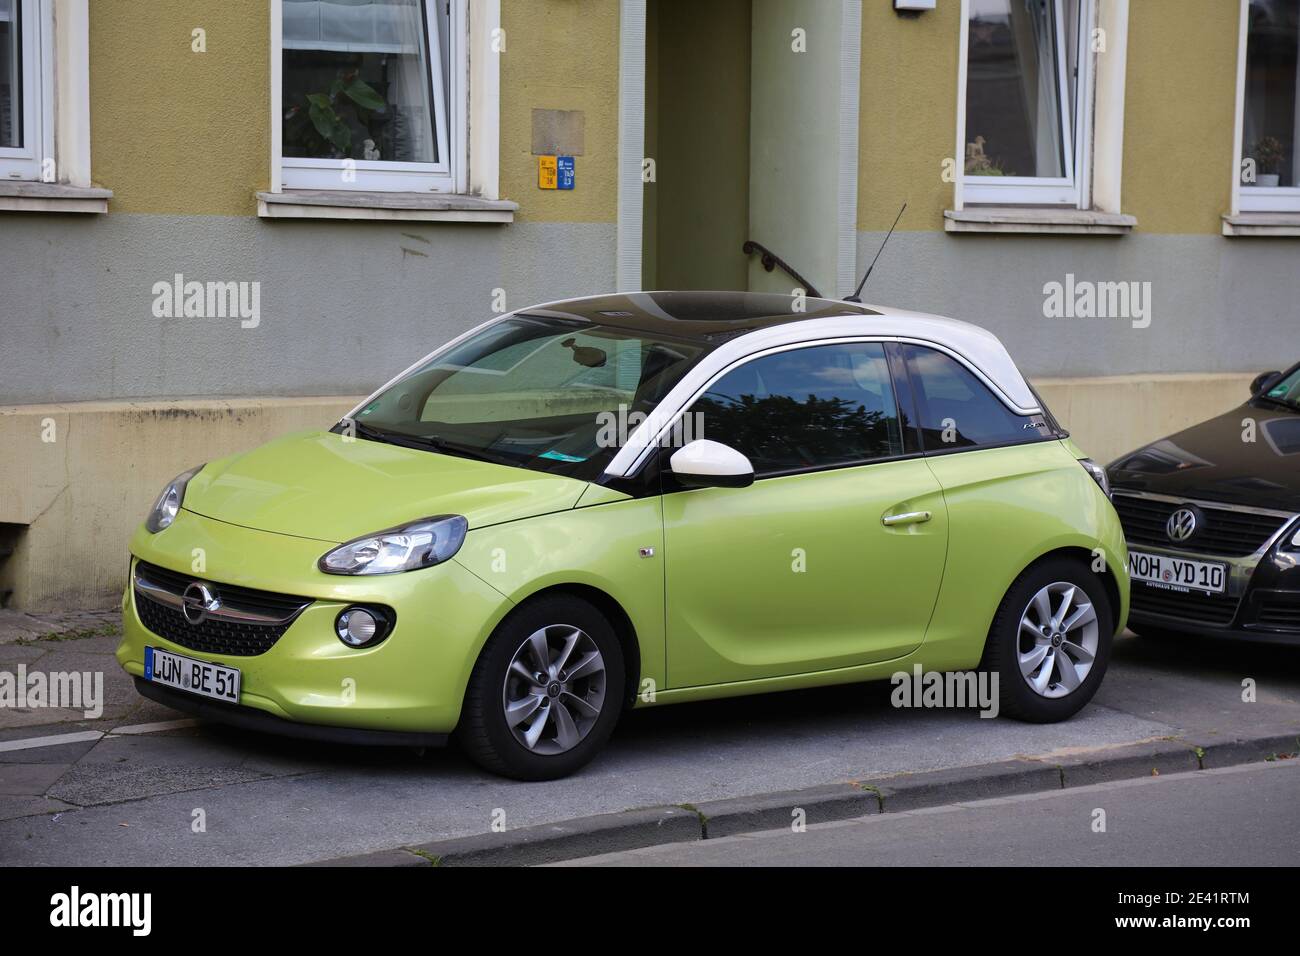 DORTMUND, GERMANY - SEPTEMBER 16, 2020: Opel Adam compact economy car parked in Germany. There were 45.8 million cars registered in Germany (as of 201 Stock Photo